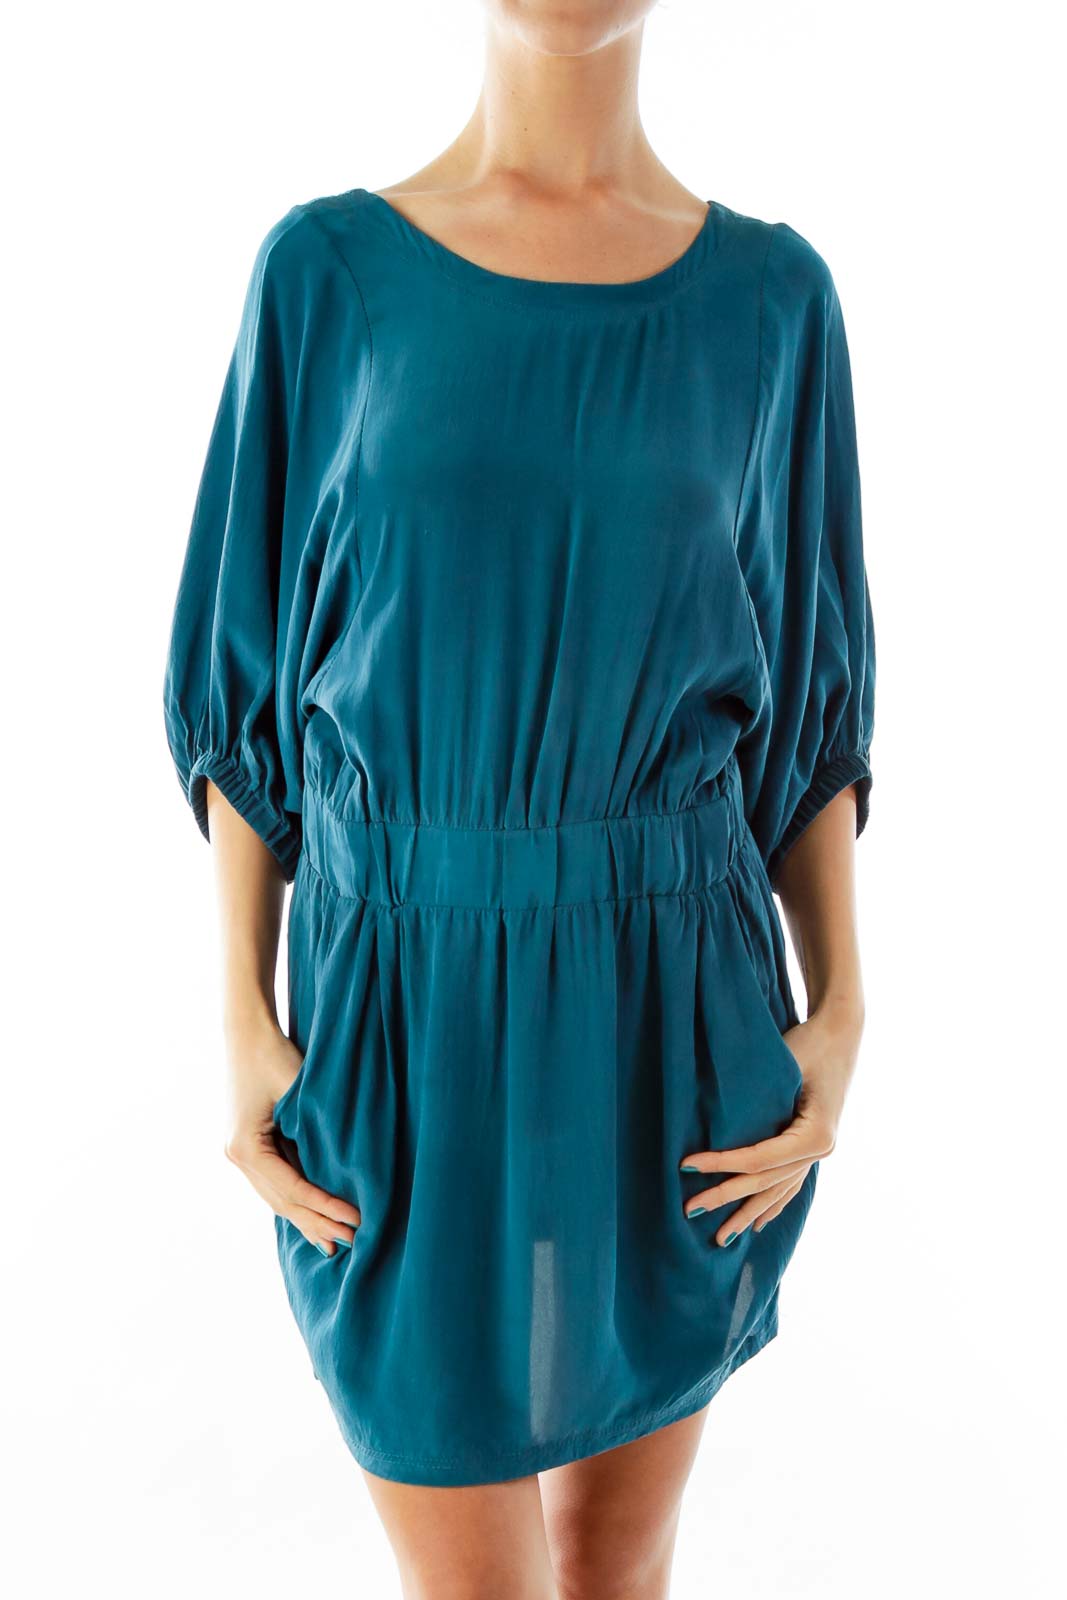 Turquoise Pocketed Day Dress Front